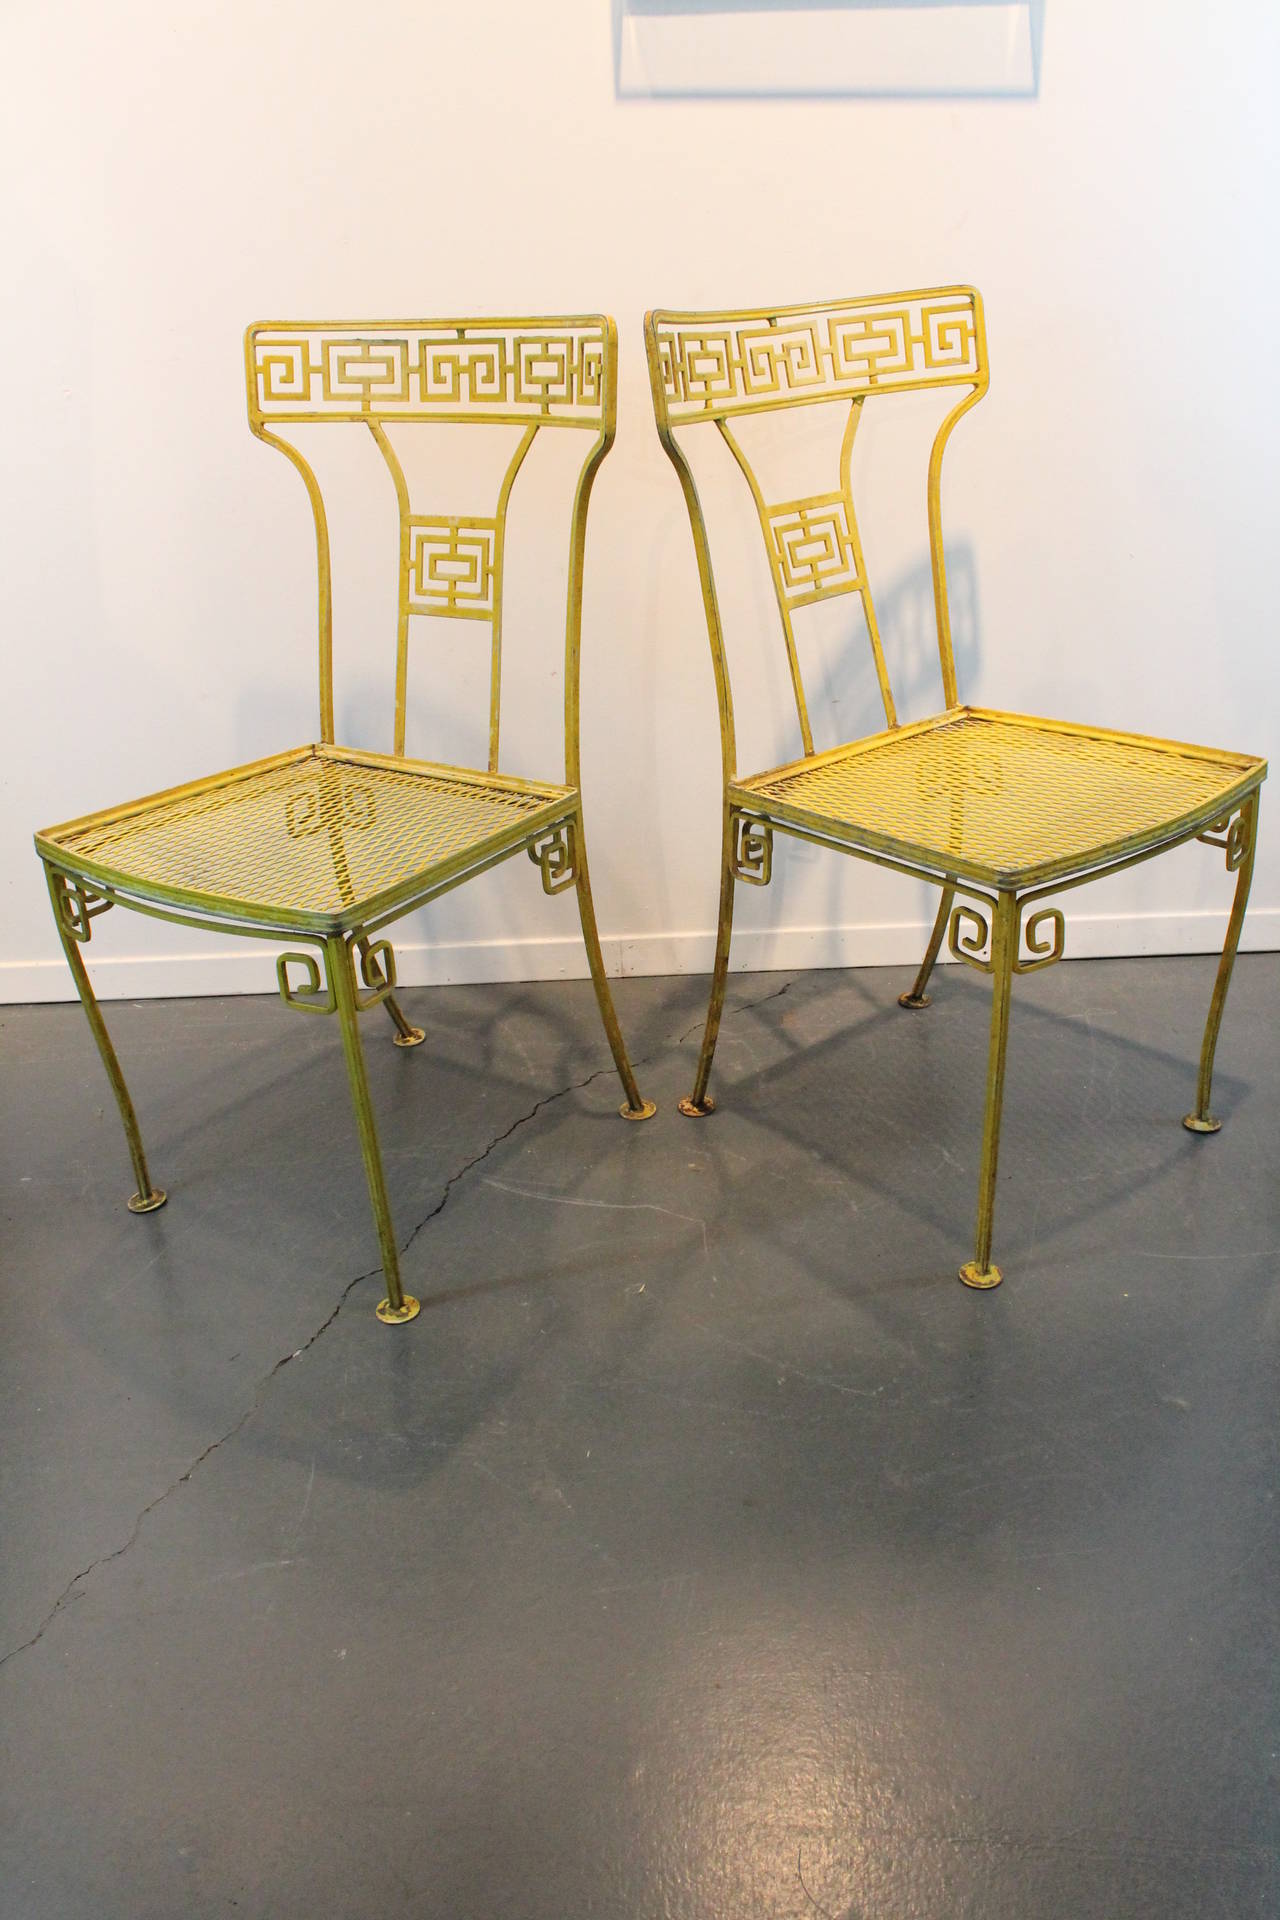 Pair of fantastic Hollywood Regency iron greek key designed garden chairs.
Taken directly out of the garden , in original yellow. Can be sandblasted and powder coated in any color if you prefer.
There is a third chair available.
Attributed to